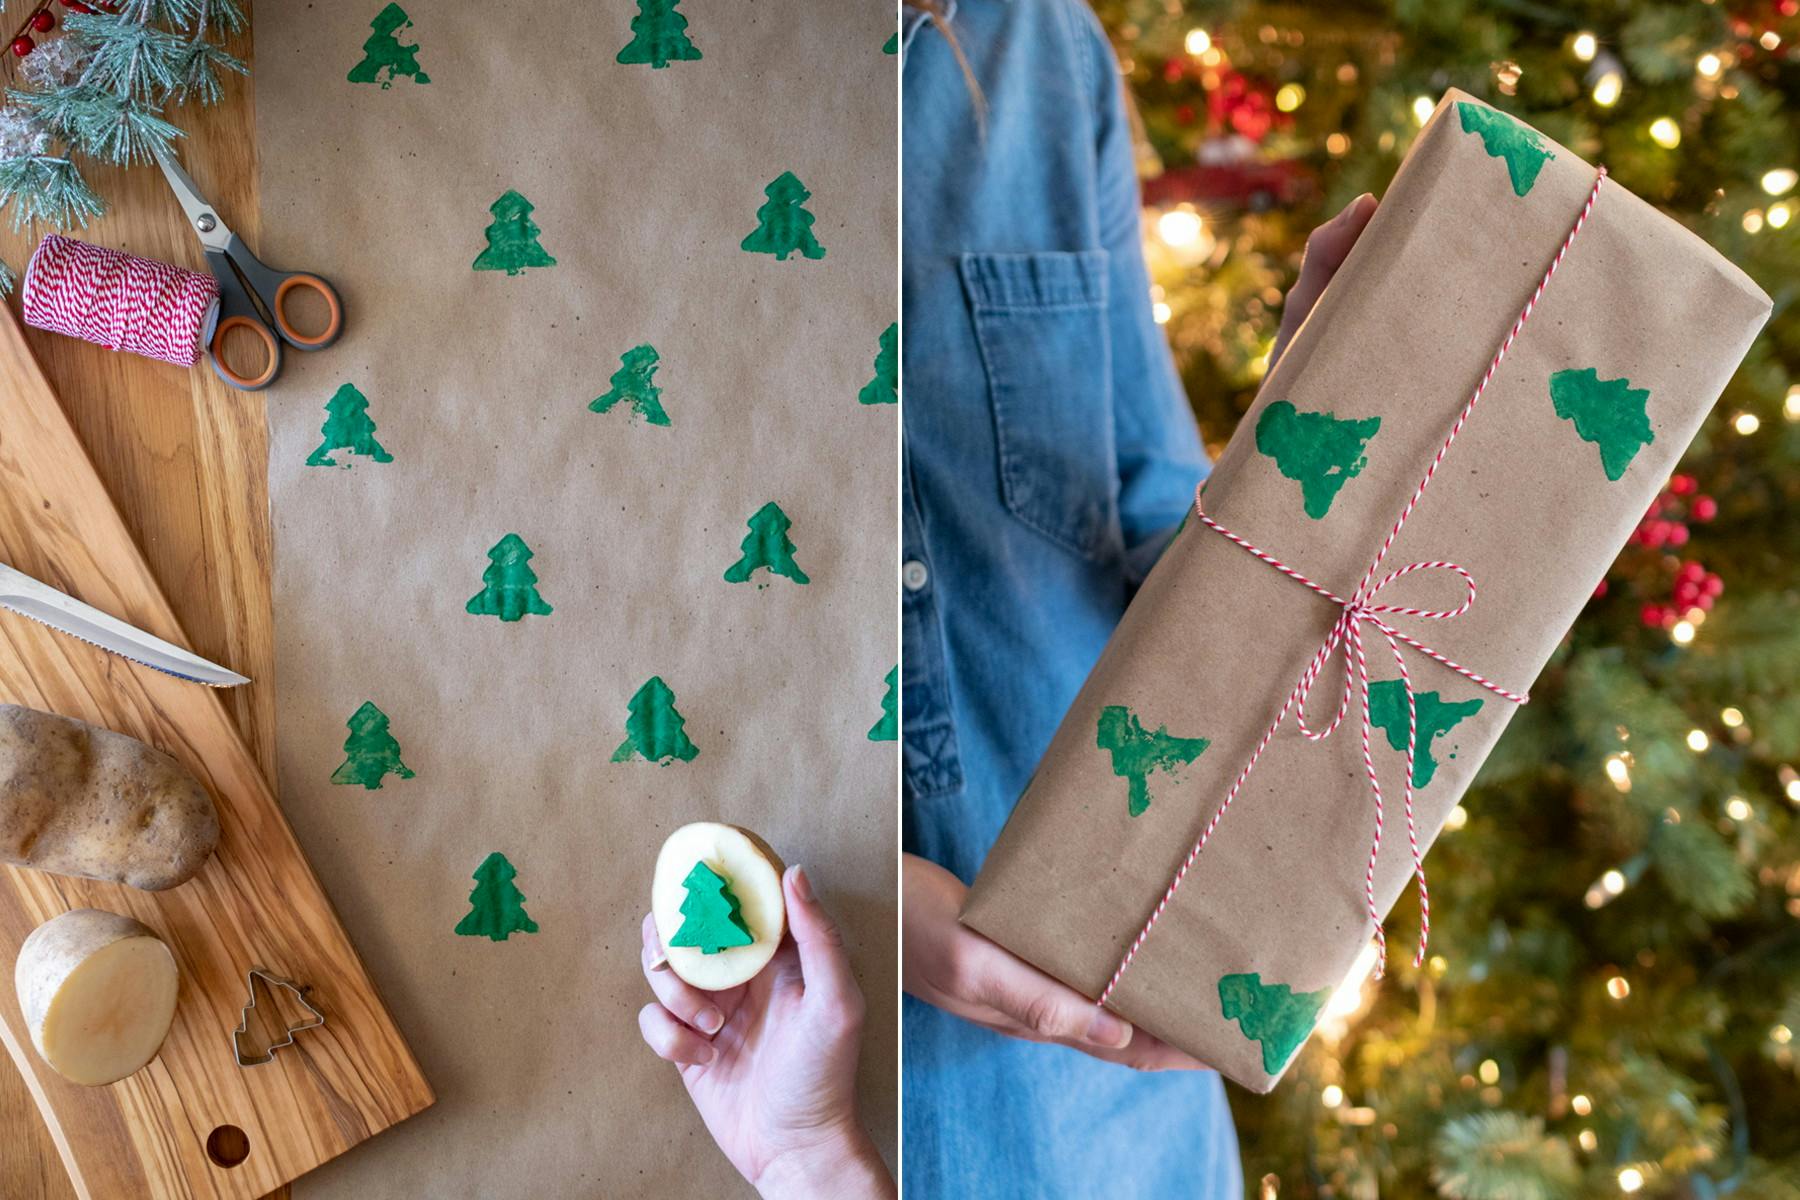 A person using a potato with a Christmas tree shape cut out of it to stamp green Christmas trees onto brown paper, making their own wrapping paper.